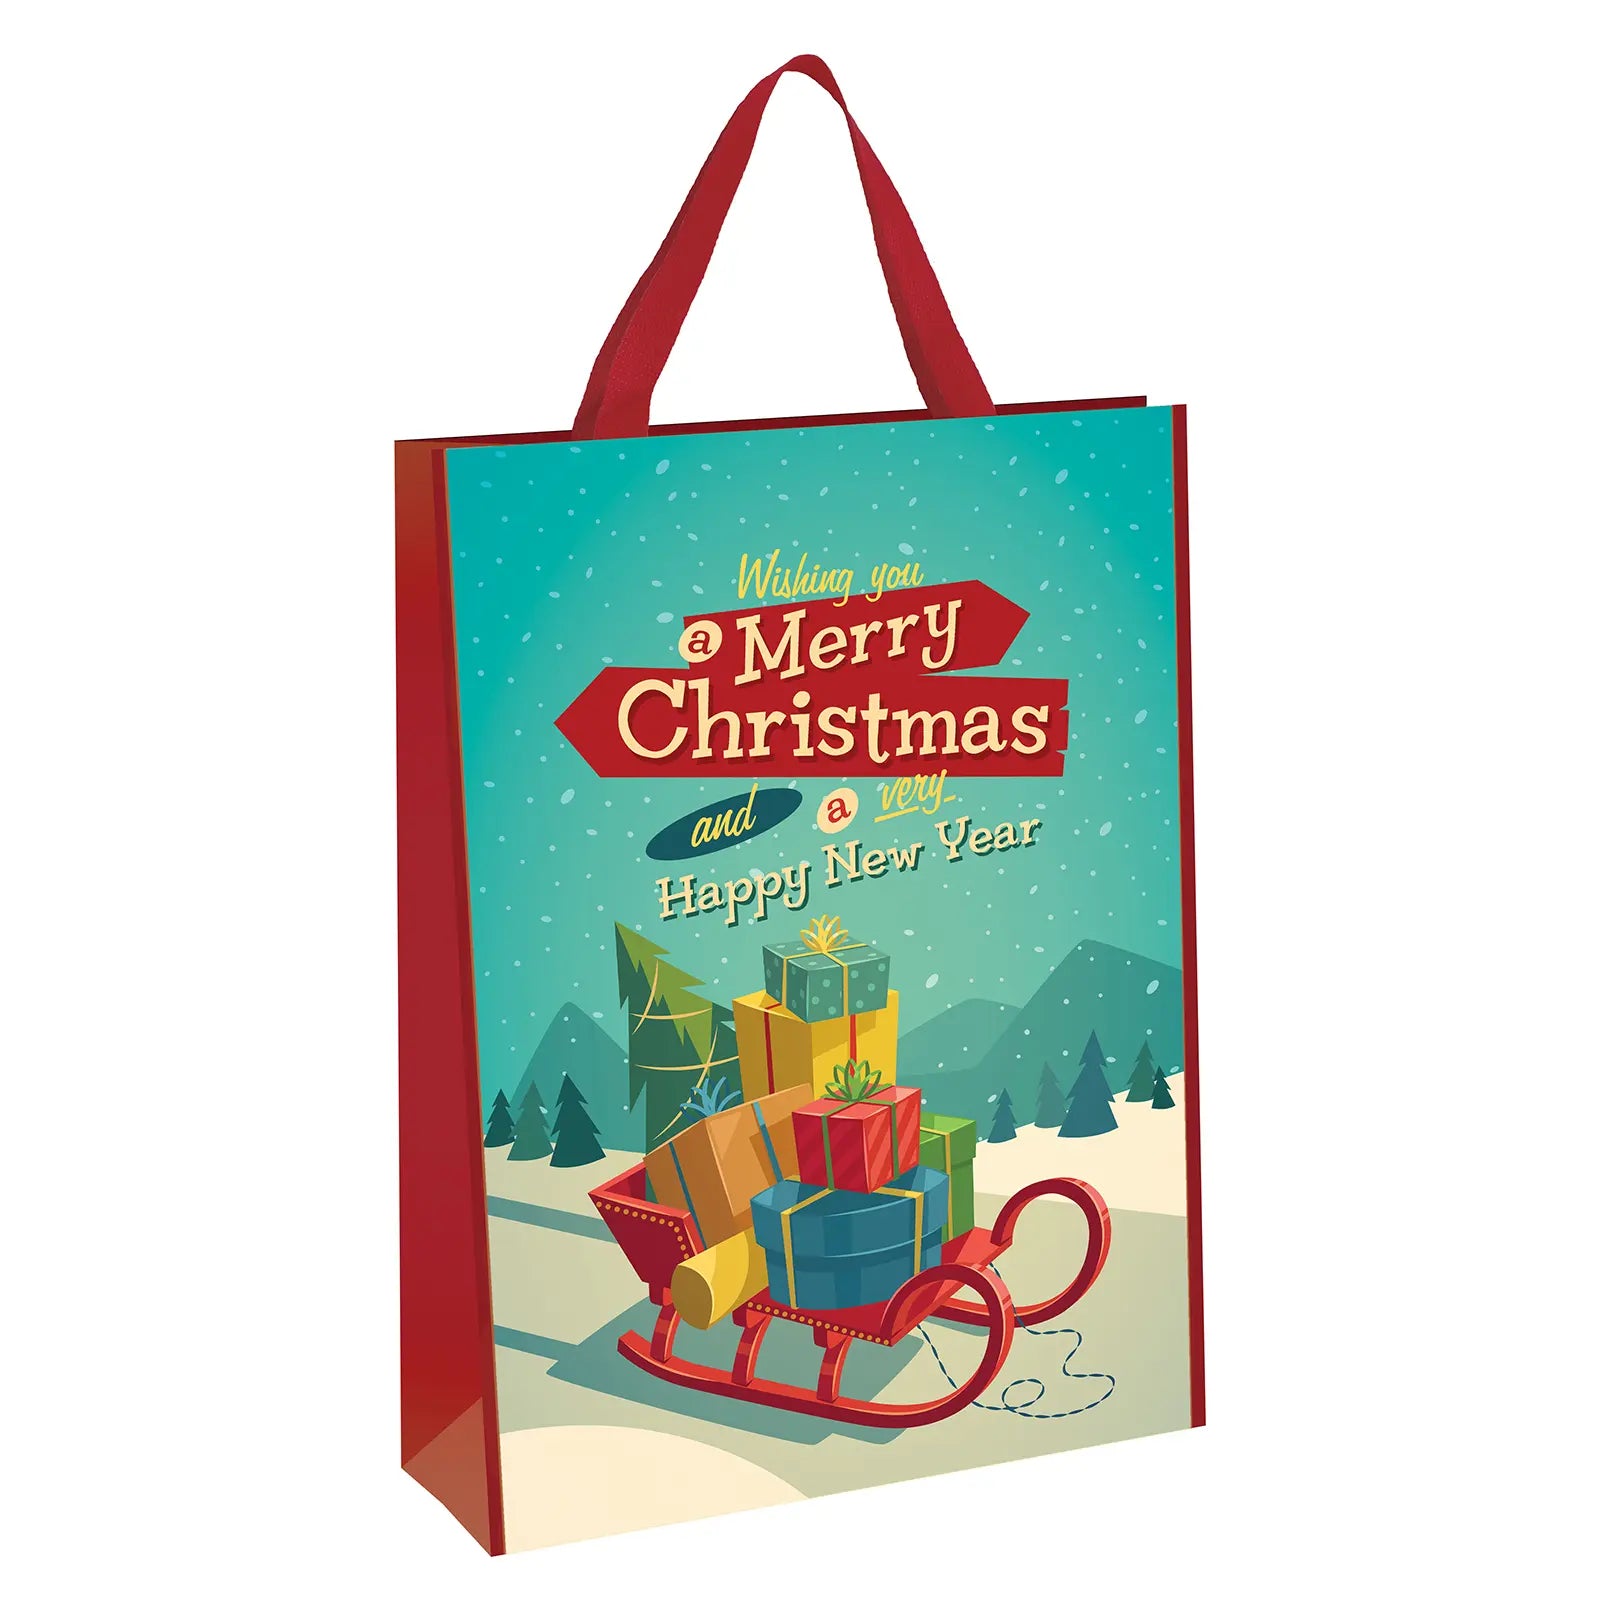 merry christmas slogan gift bag featuring santa sleigh design with a range of colourful gifts